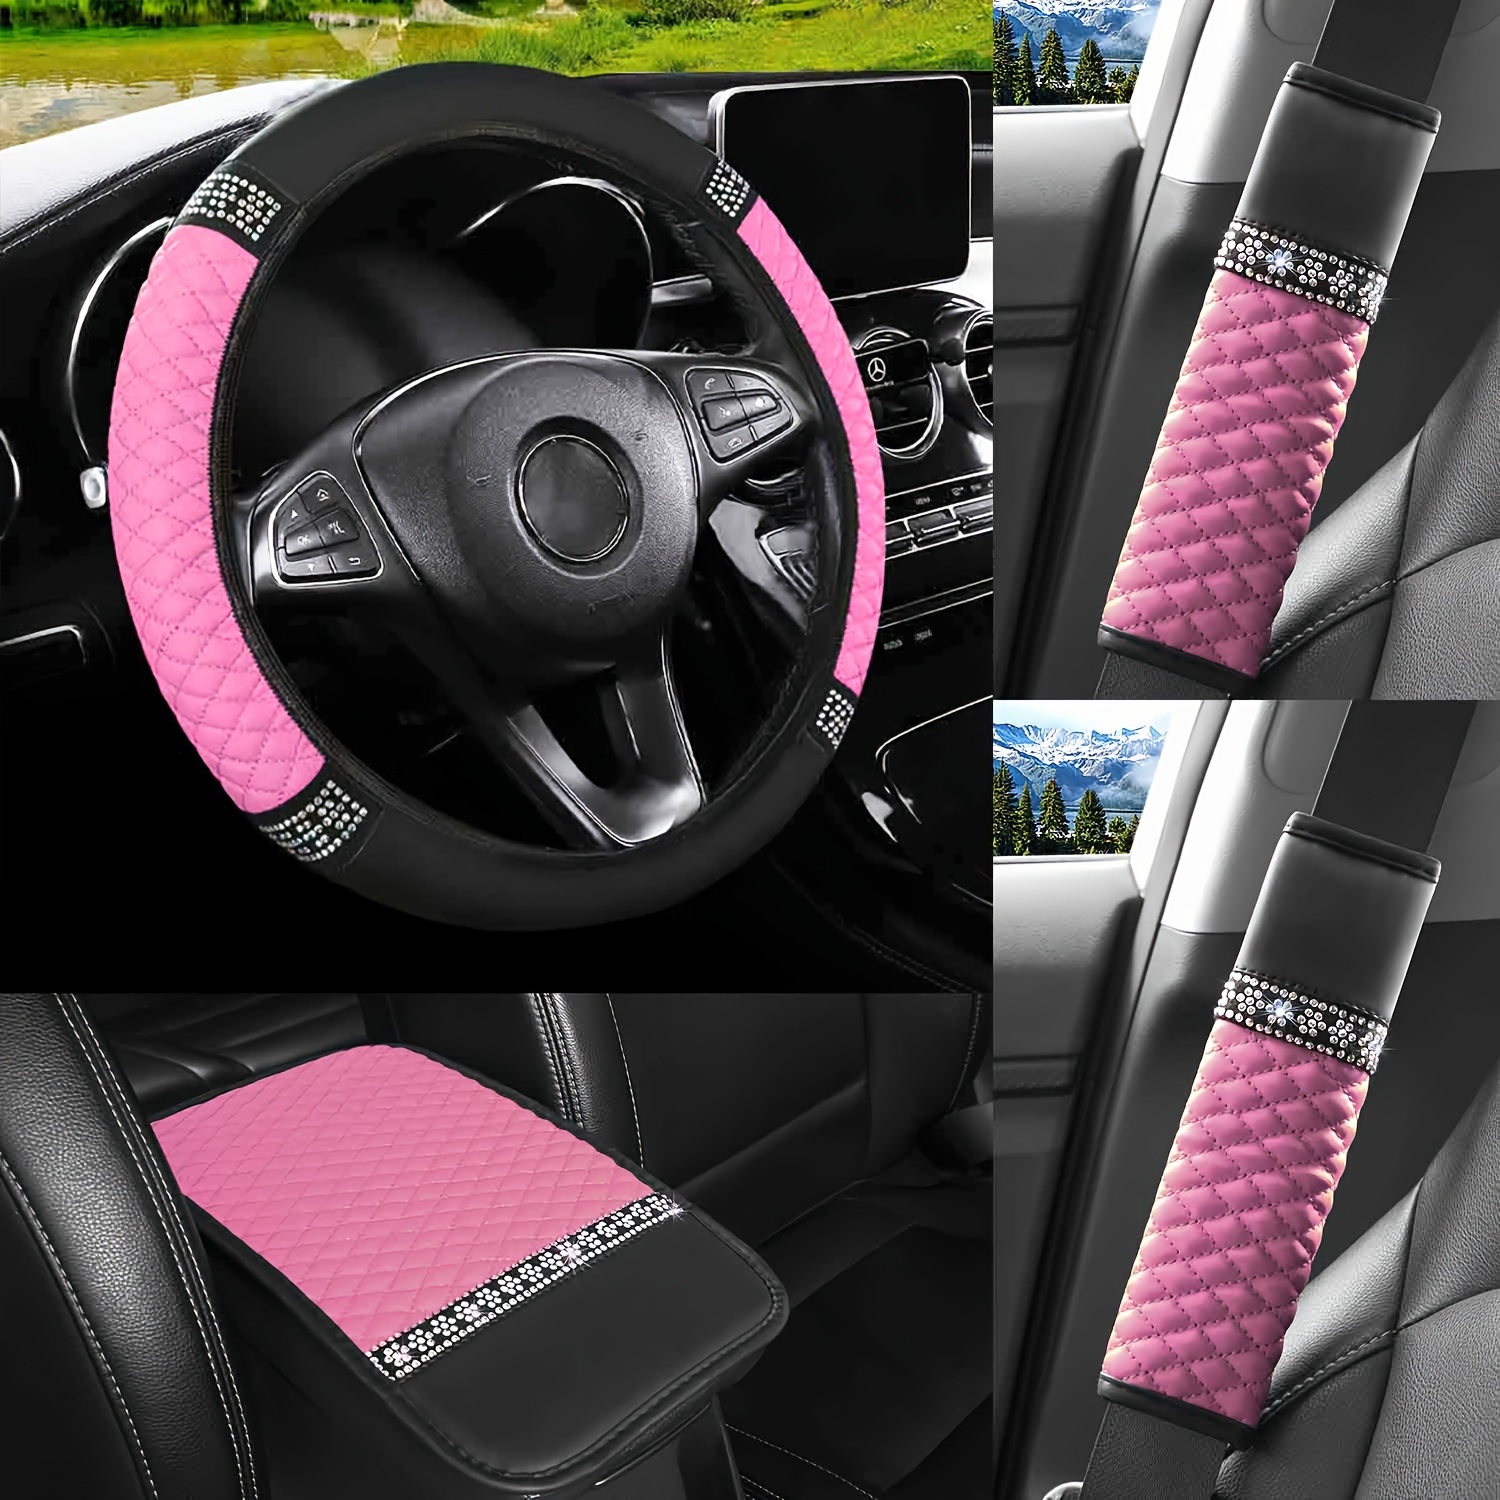 

4-piece Glittering Pu Leather Car Interior Set - Steering Wheel Cover, Center Console Pad, Seatbelt Covers - Durable, Comfortable, Universal Fit - Adds Colorful Style To Your Vehicle!